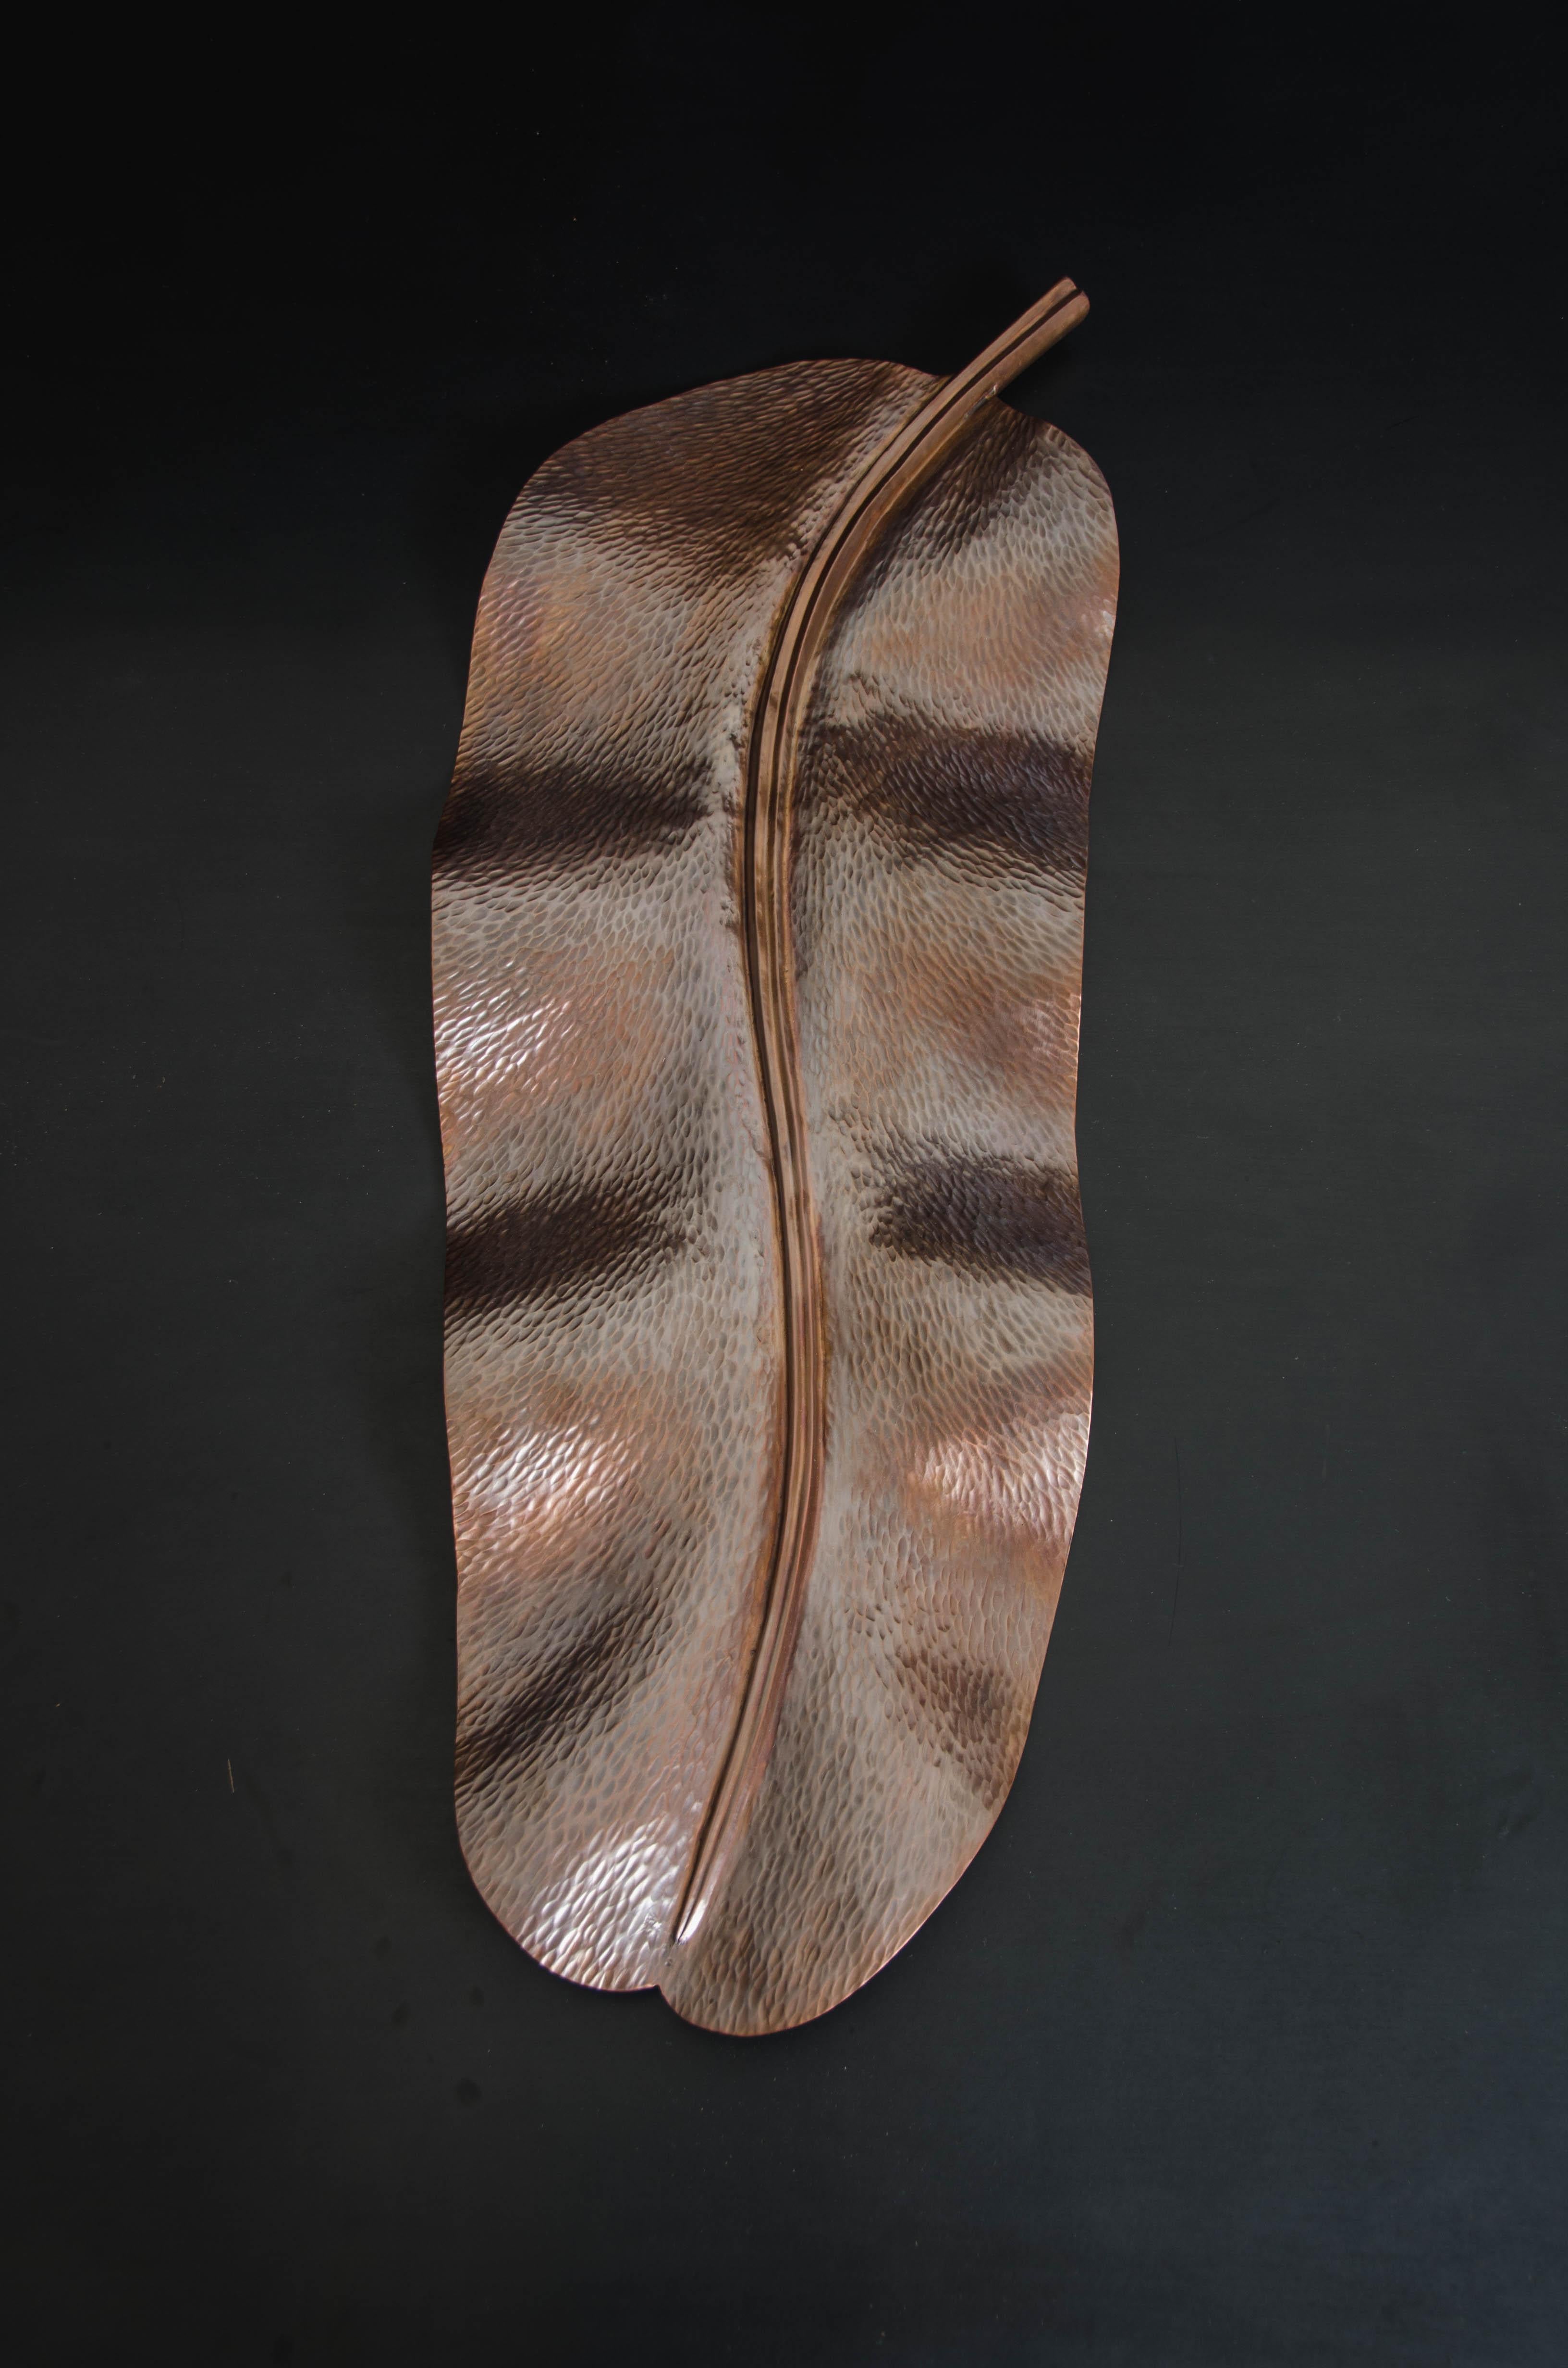 Repoussé Banana Leaf, Antique Copper by Robert Kuo, Hand Repousse, Limited Edition For Sale